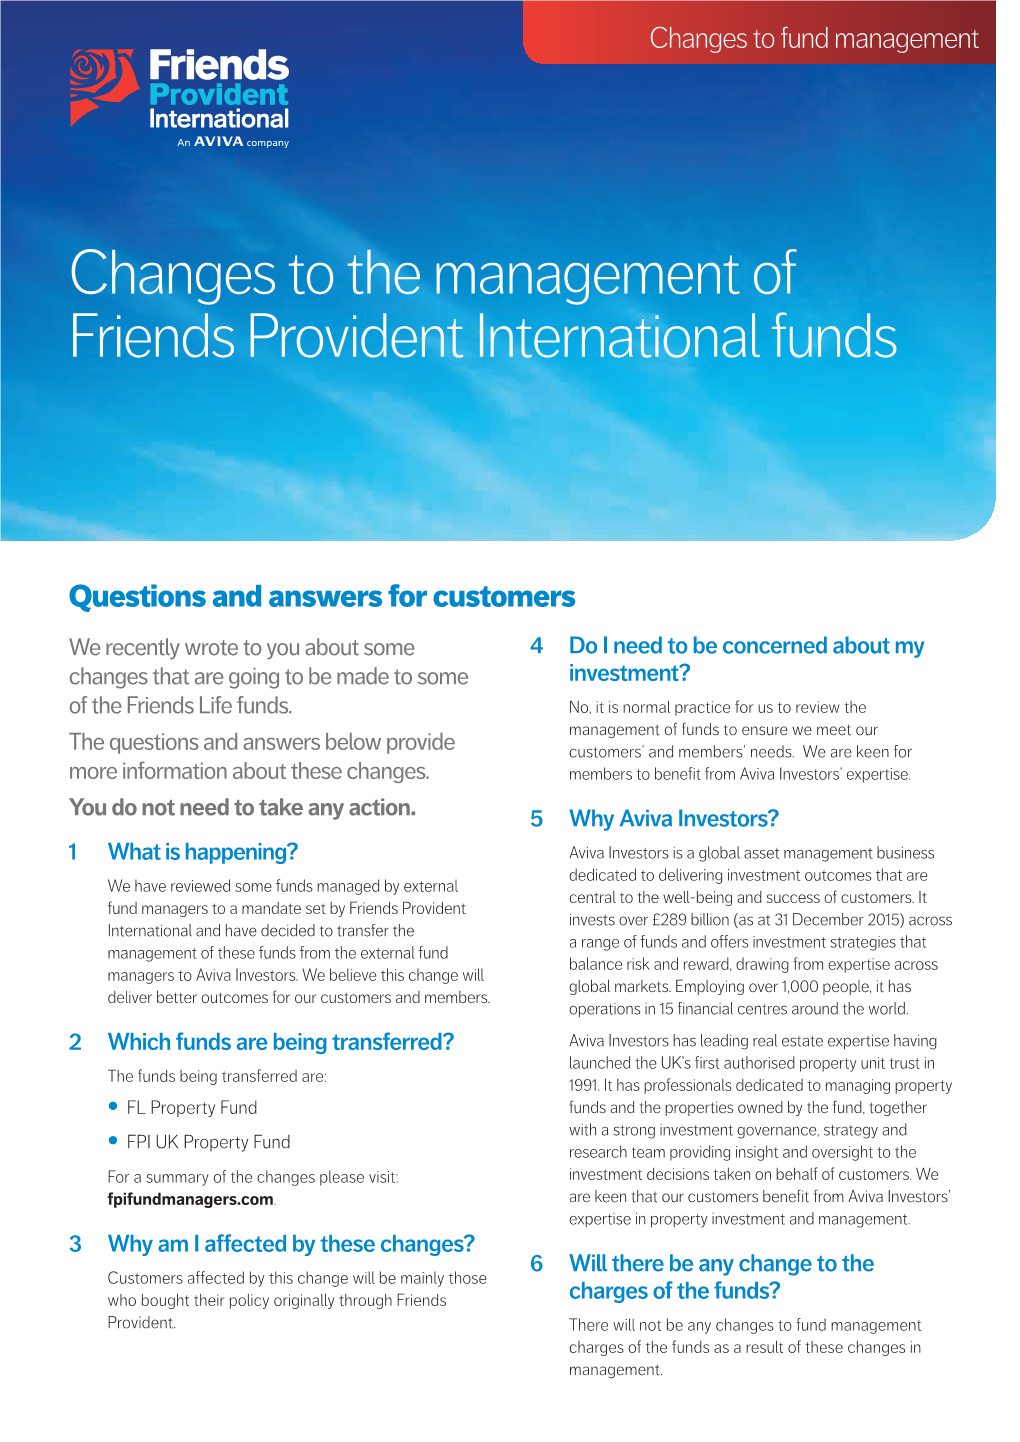 Changes to the Management of Friends Provident International Funds